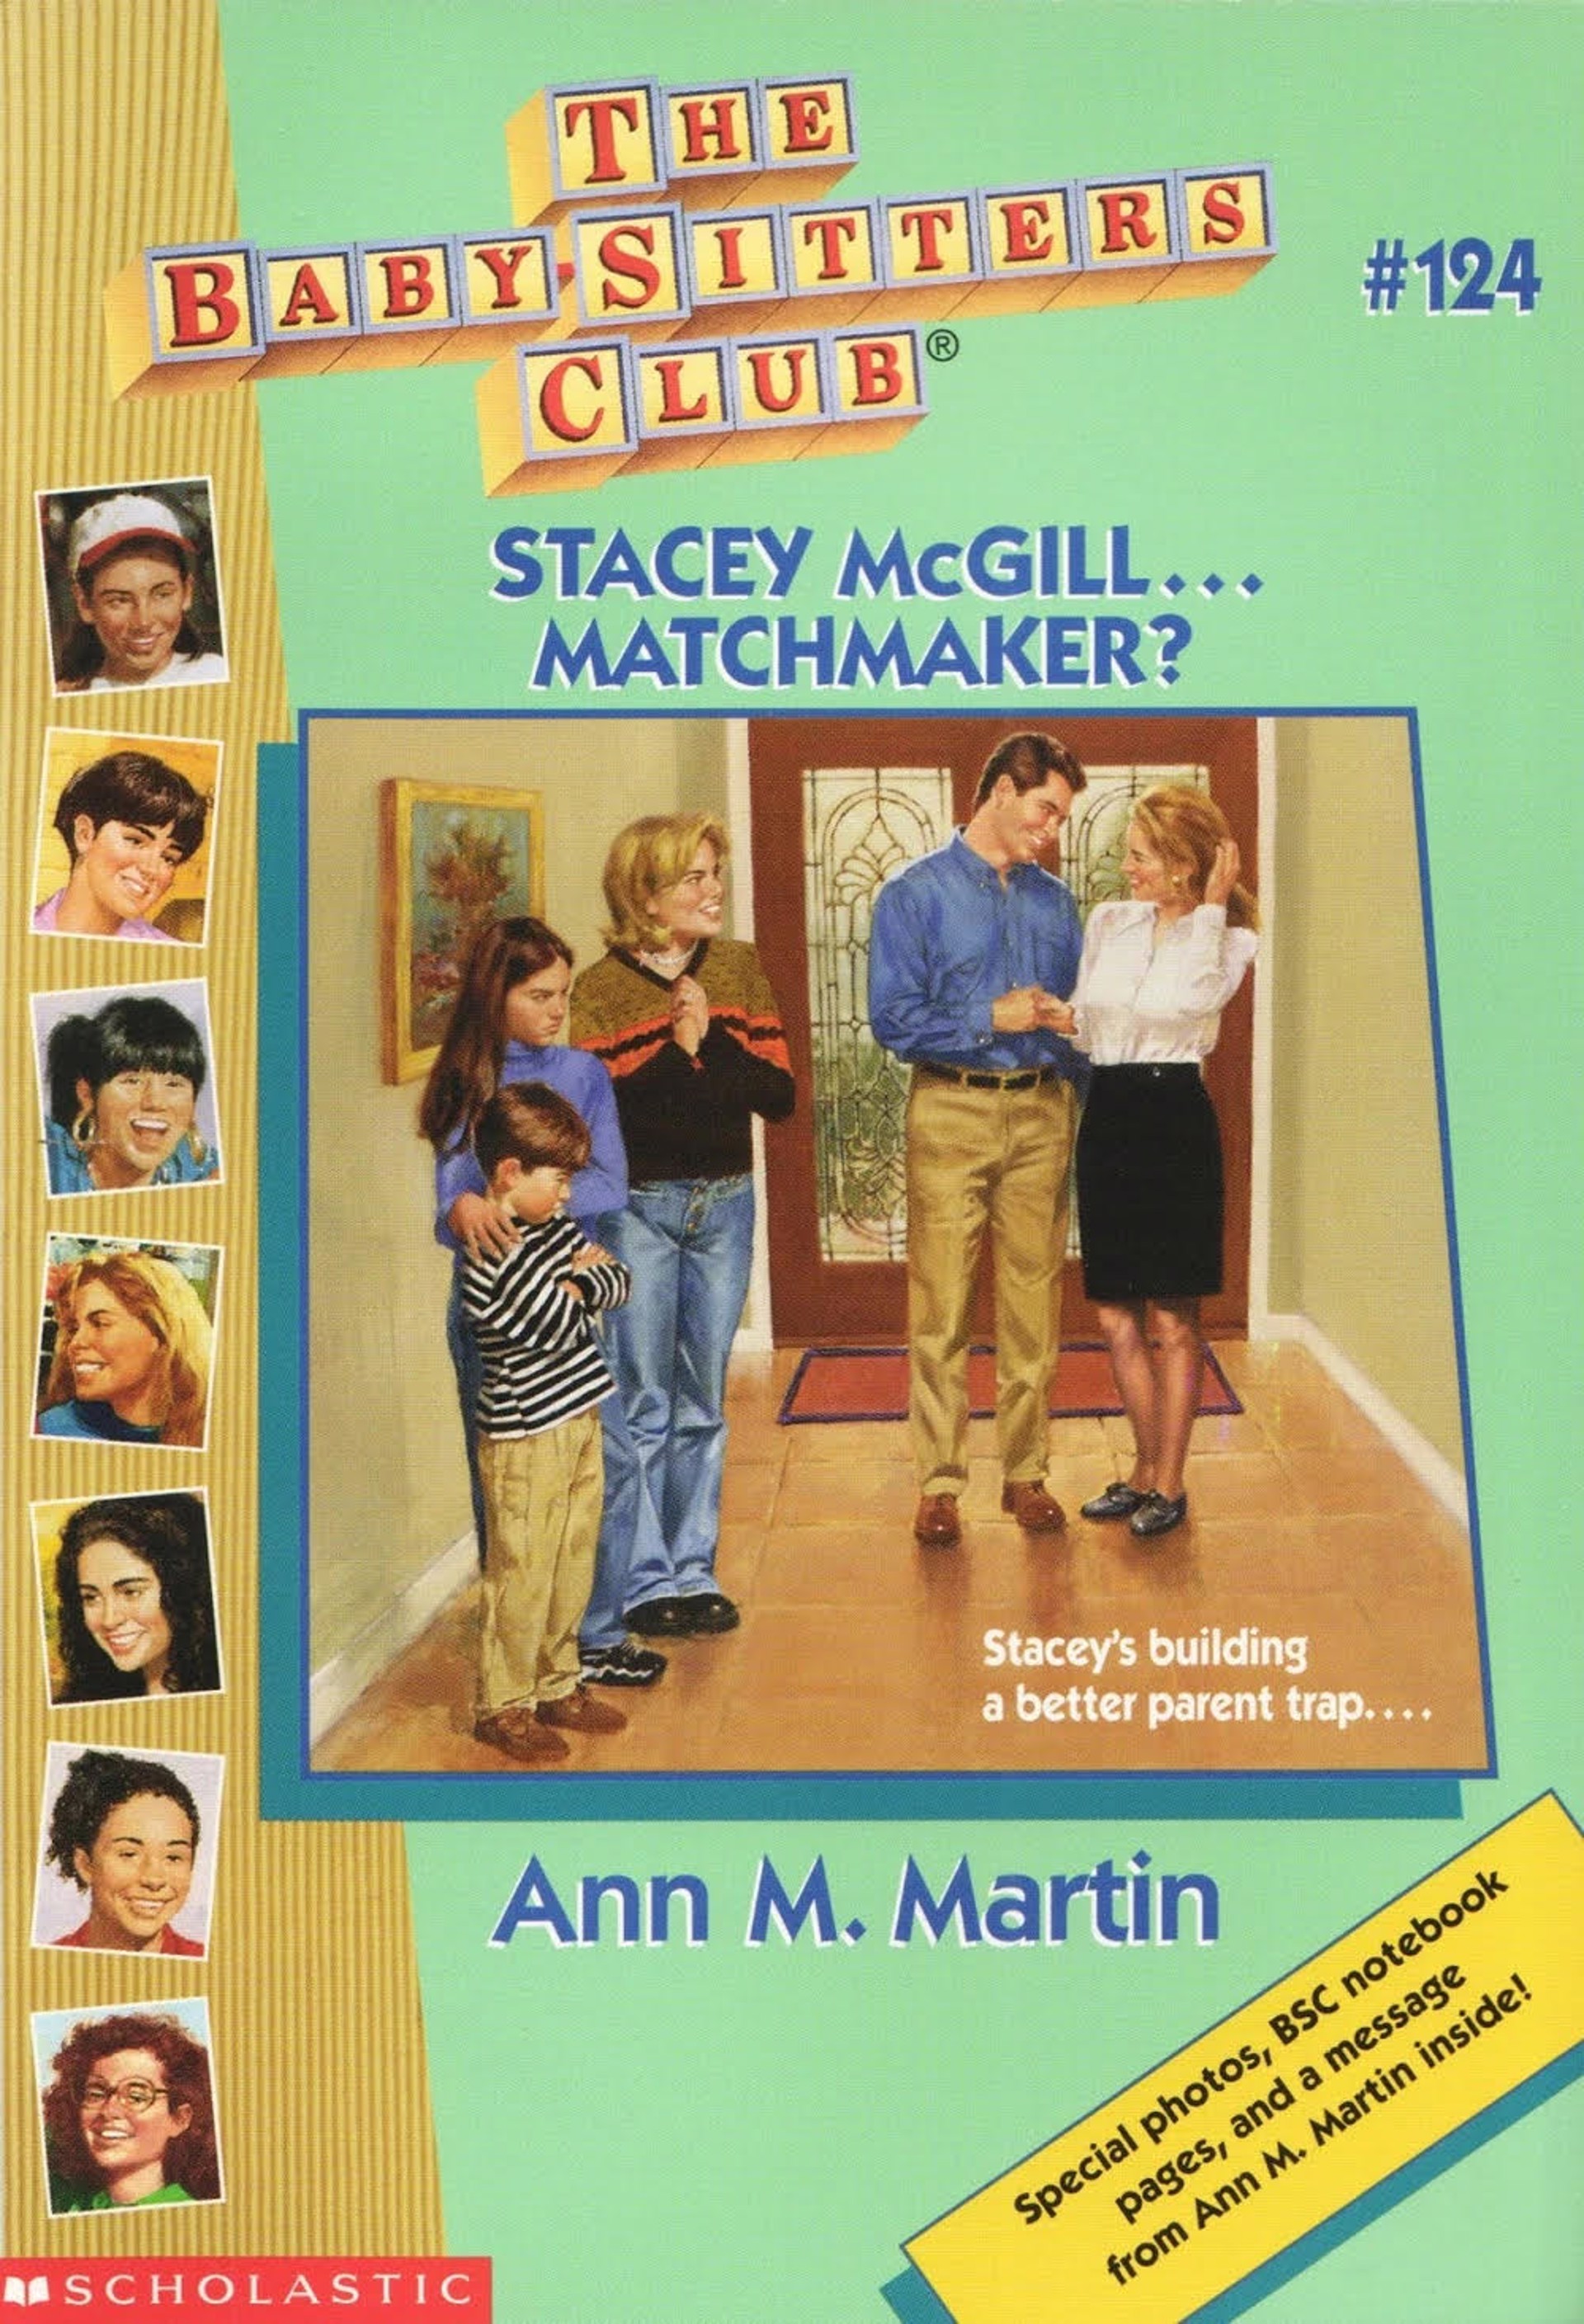 The Babysitter's Club #124 "Stacey McGill...Matchmaker?" by Hodges Soileau